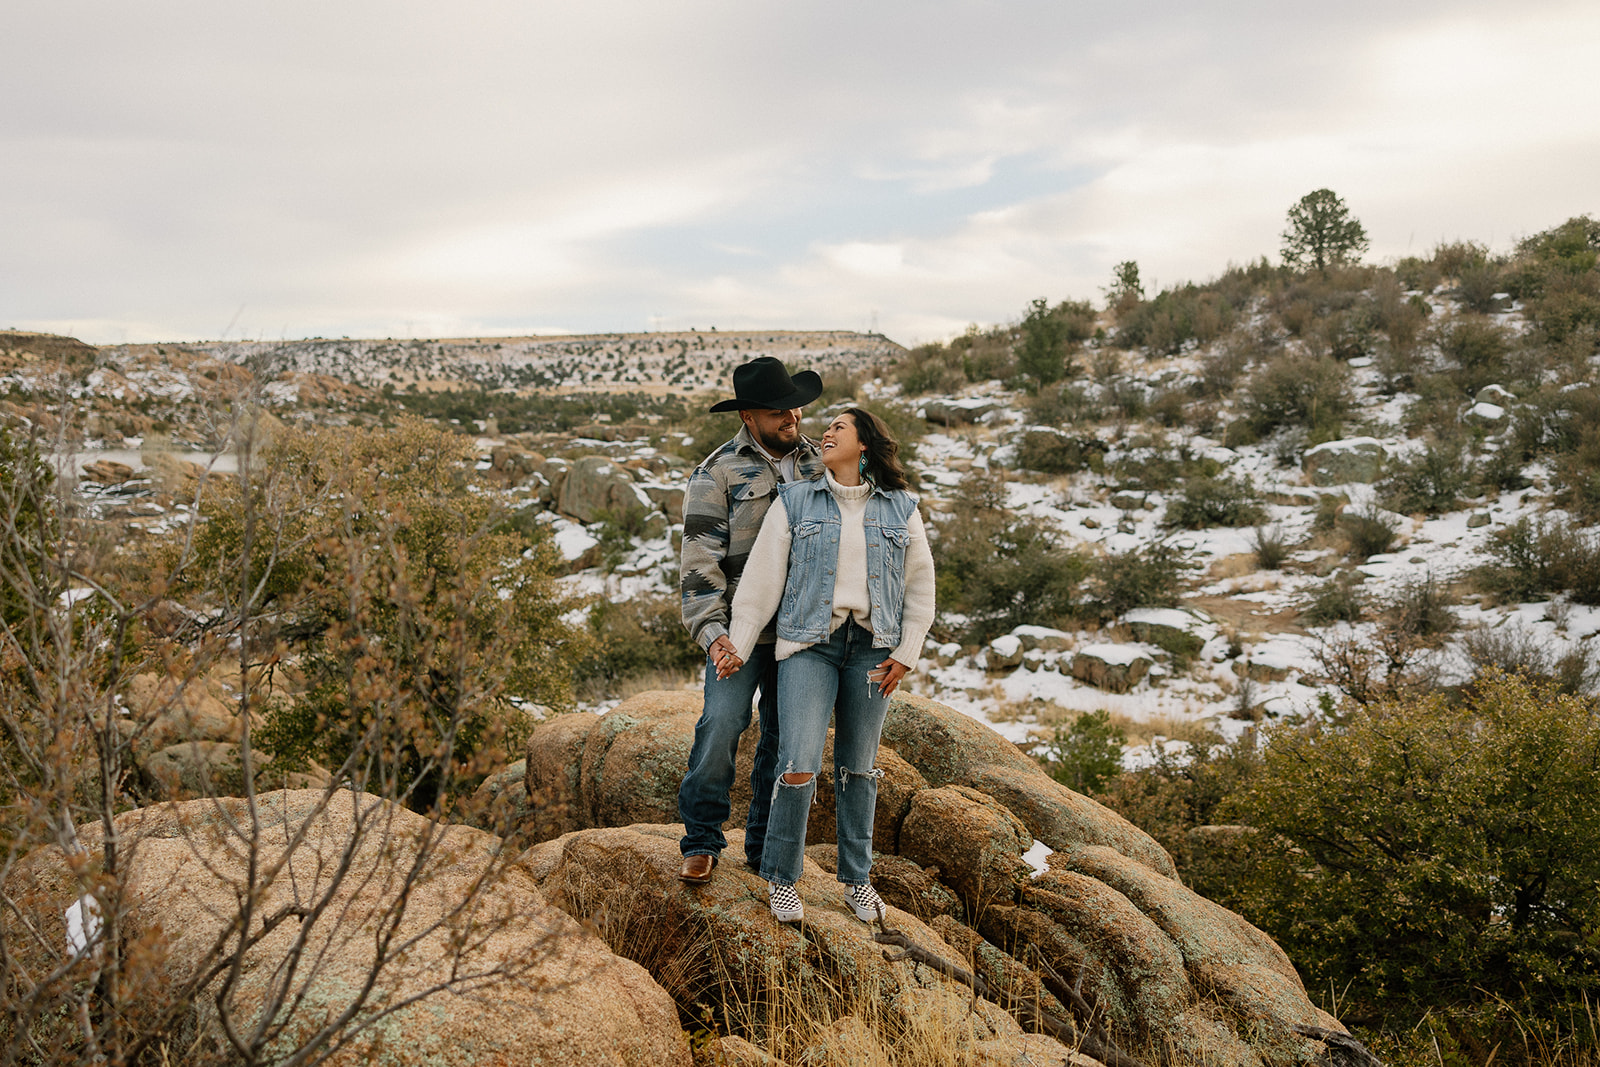 Beautiful couple poses with snow in the background during their dreamy Arizona lake engagement